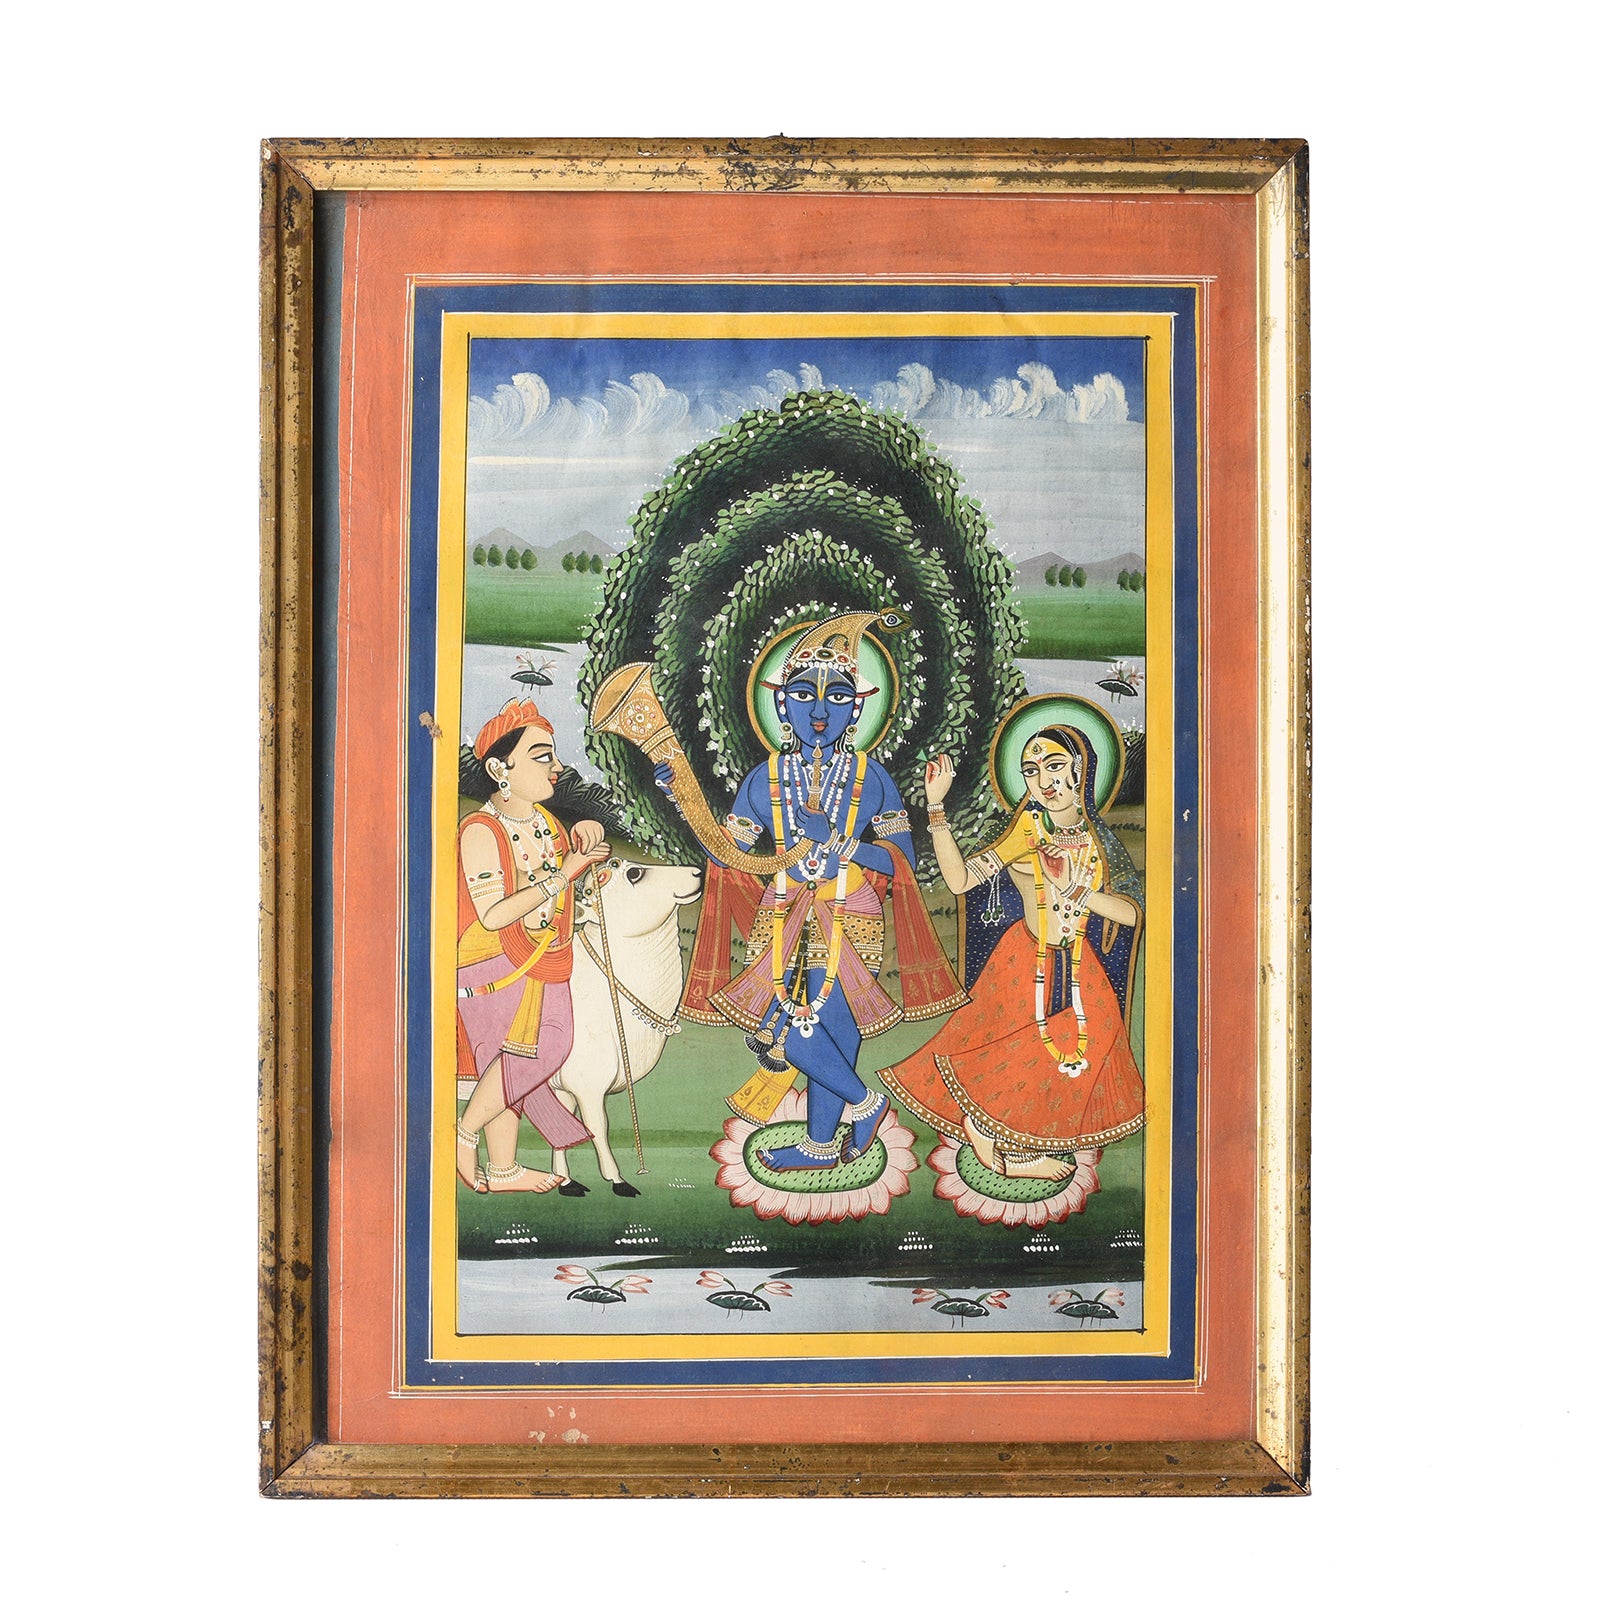 Antique Framed Watercolour Painting Of Krishna Playing A Horn - 19th Century | Indigo Antiques